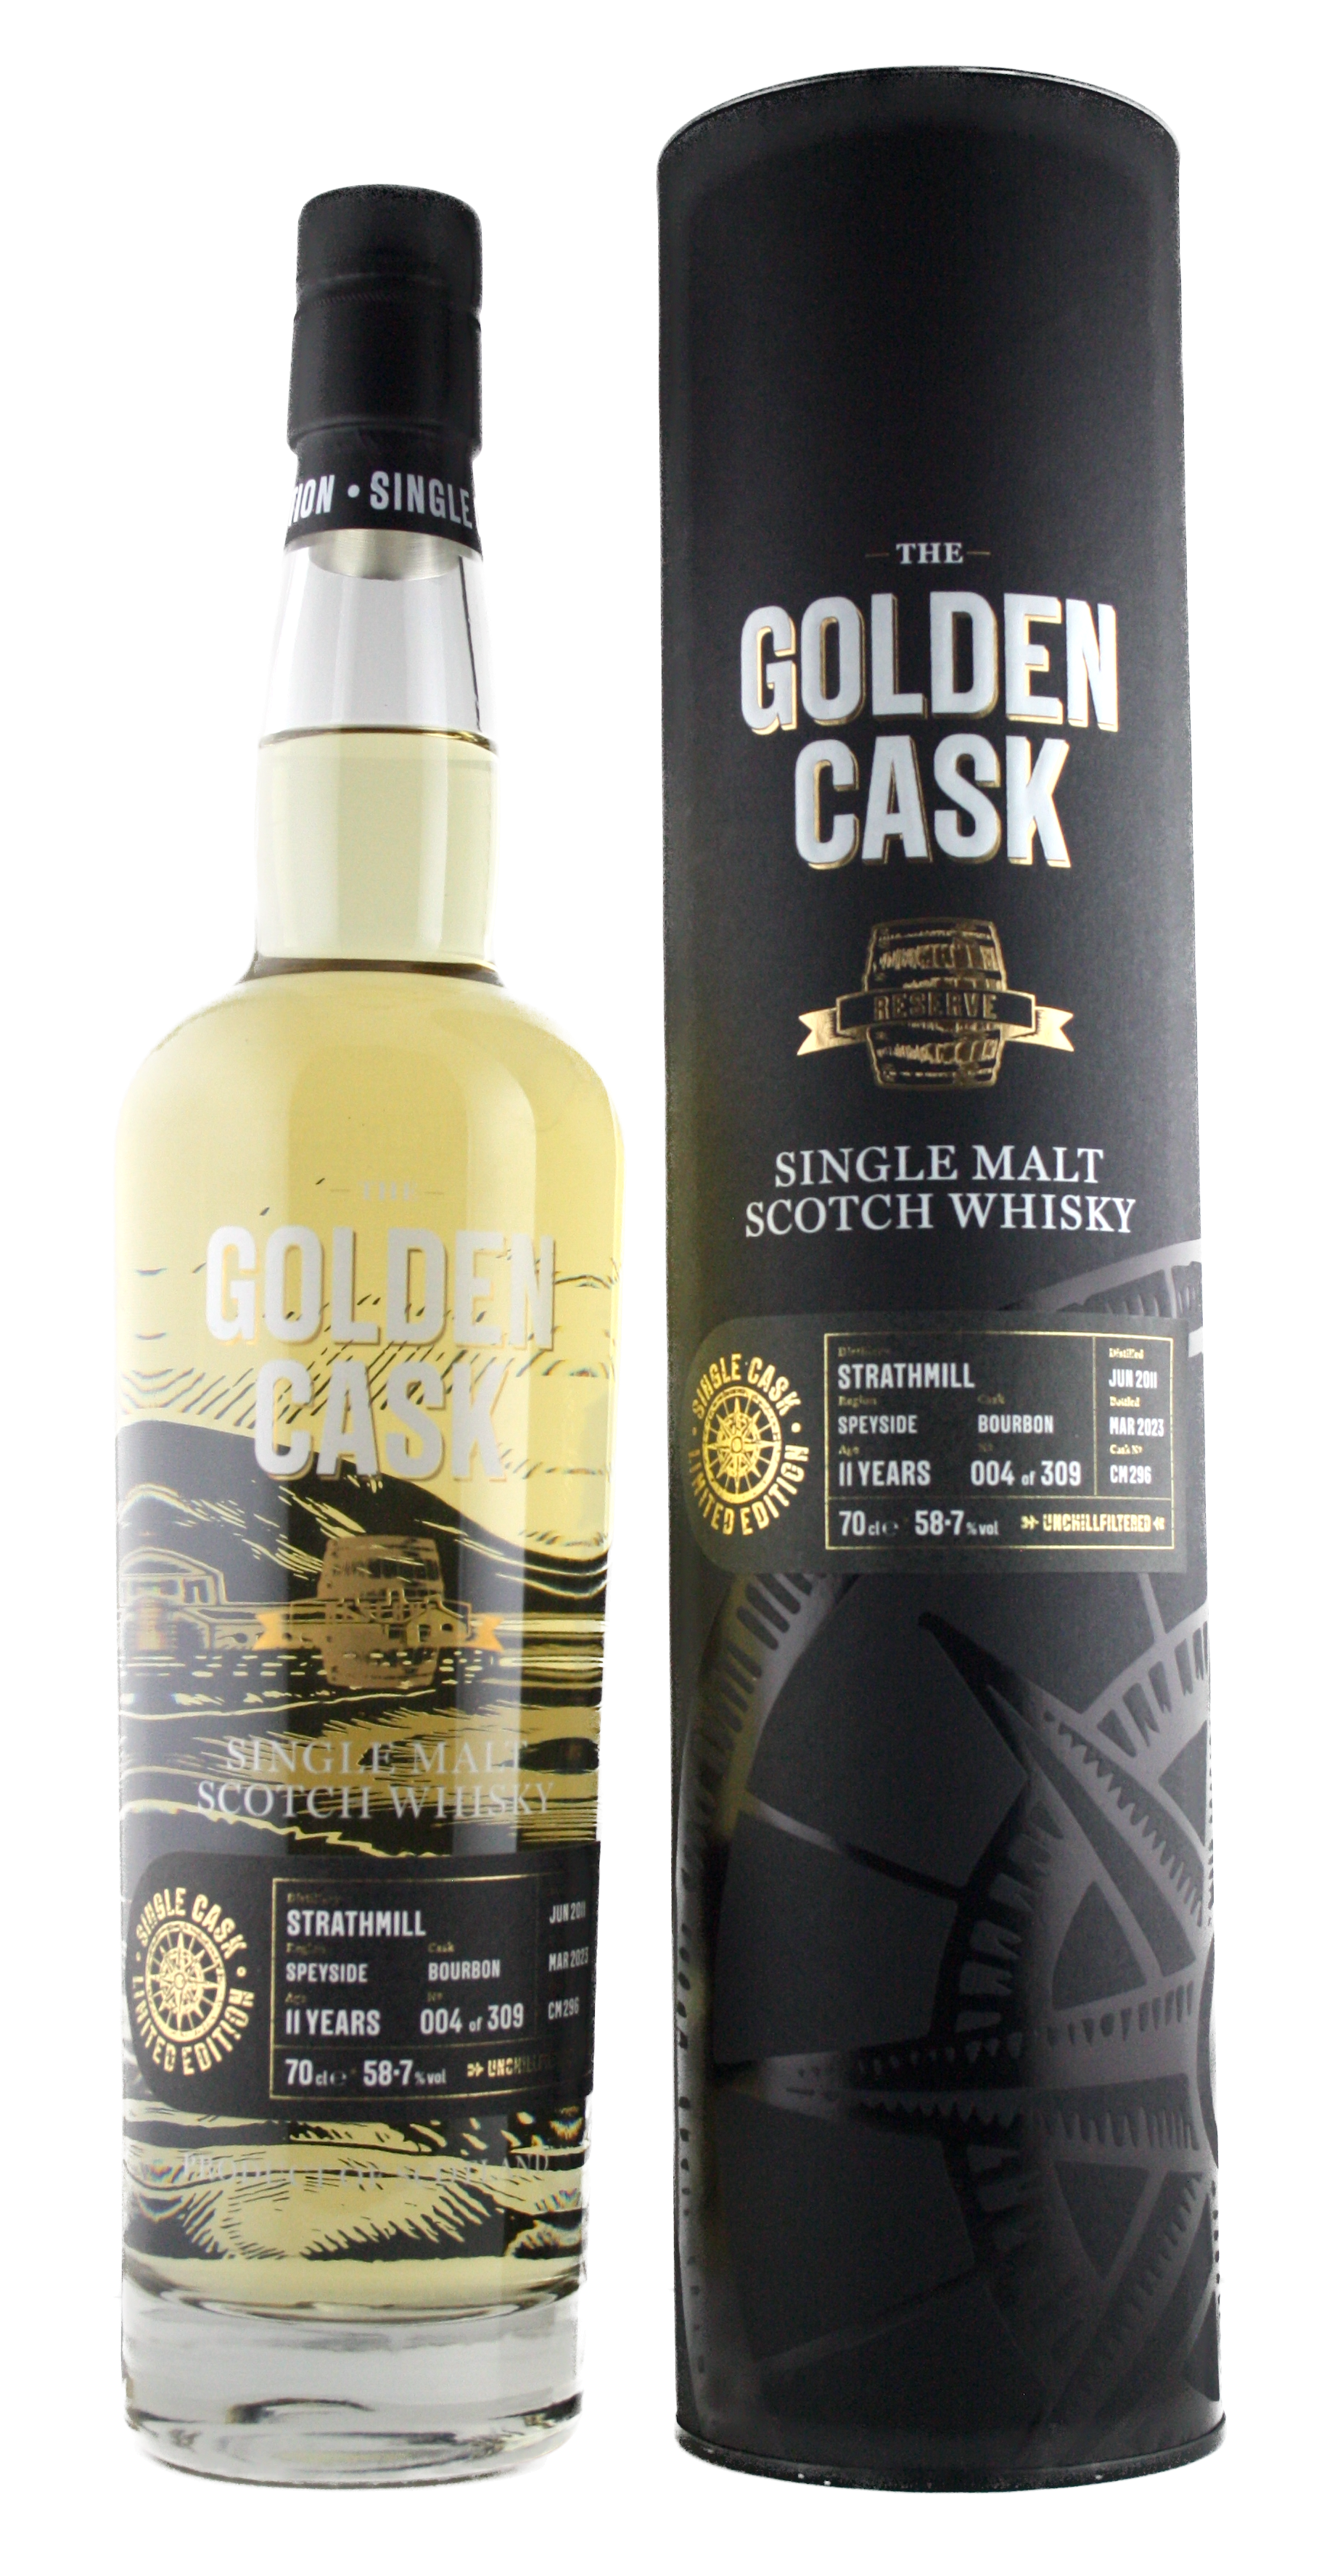 The Golden Cask Strathmill 11 Years